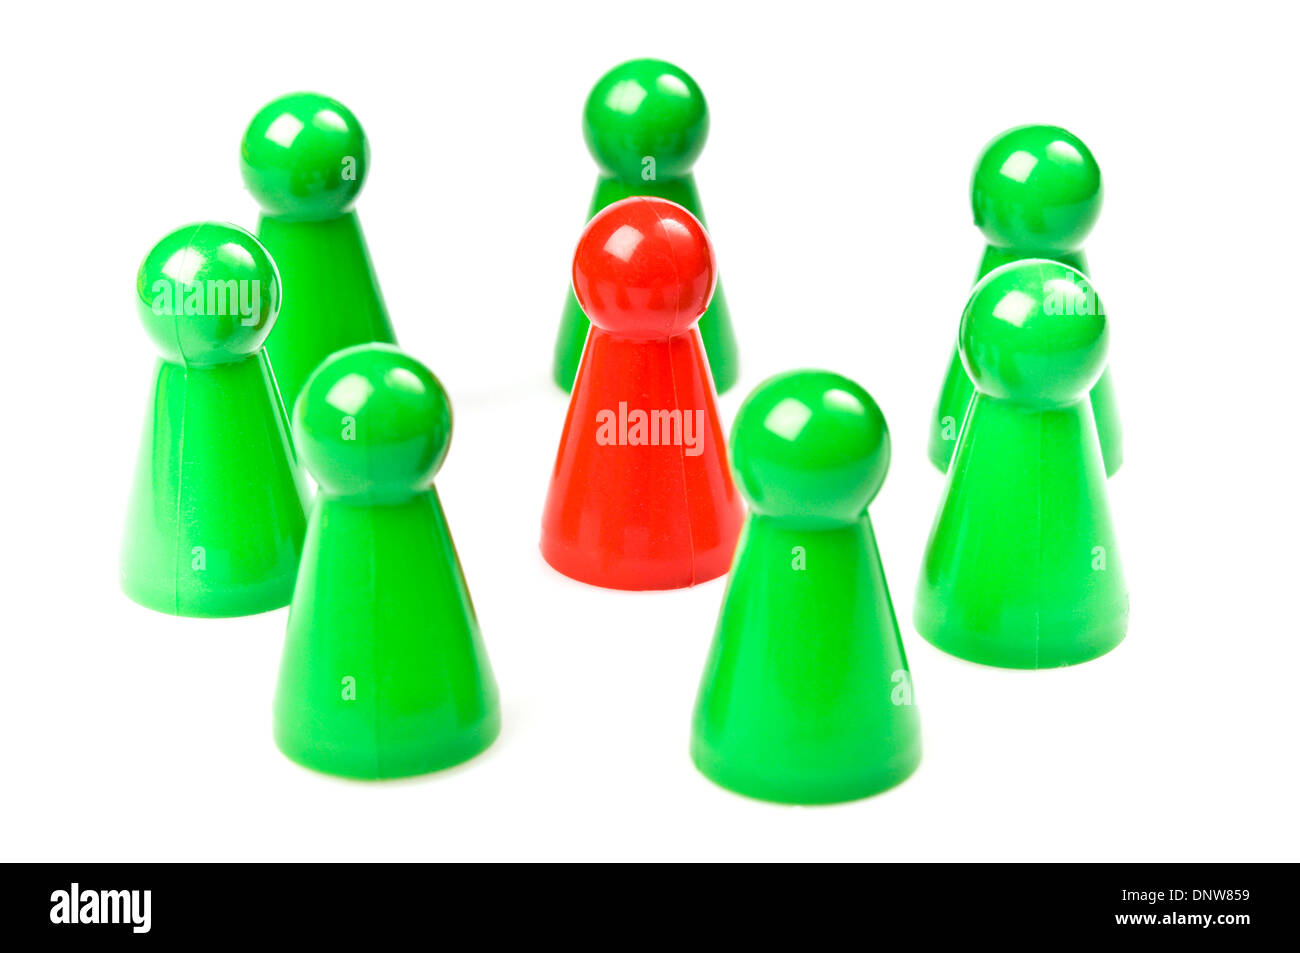 green plastic counters around one red, teamwork concept Stock Photo